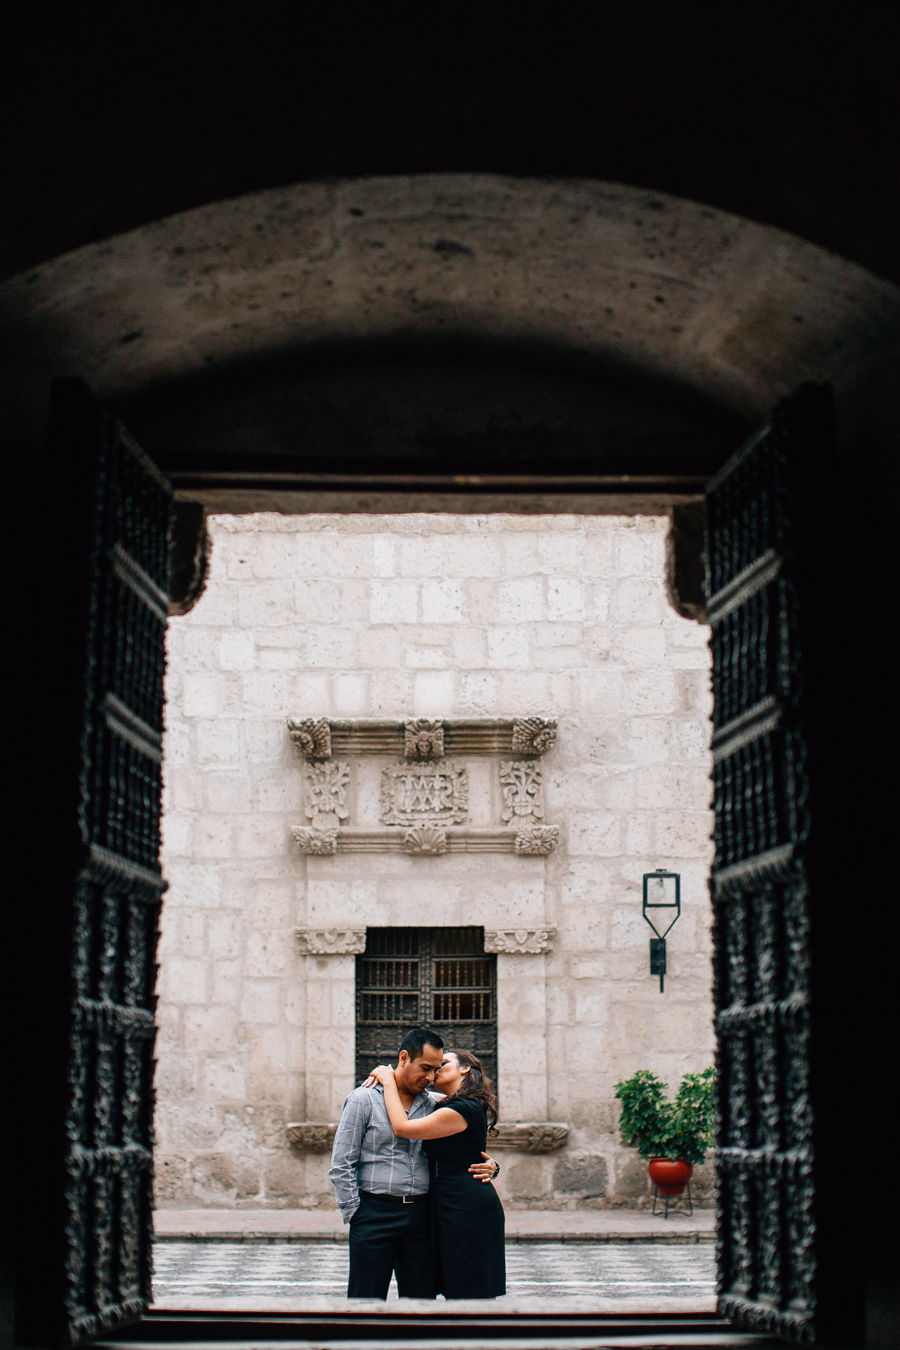 Engagement session in Arequipa-12